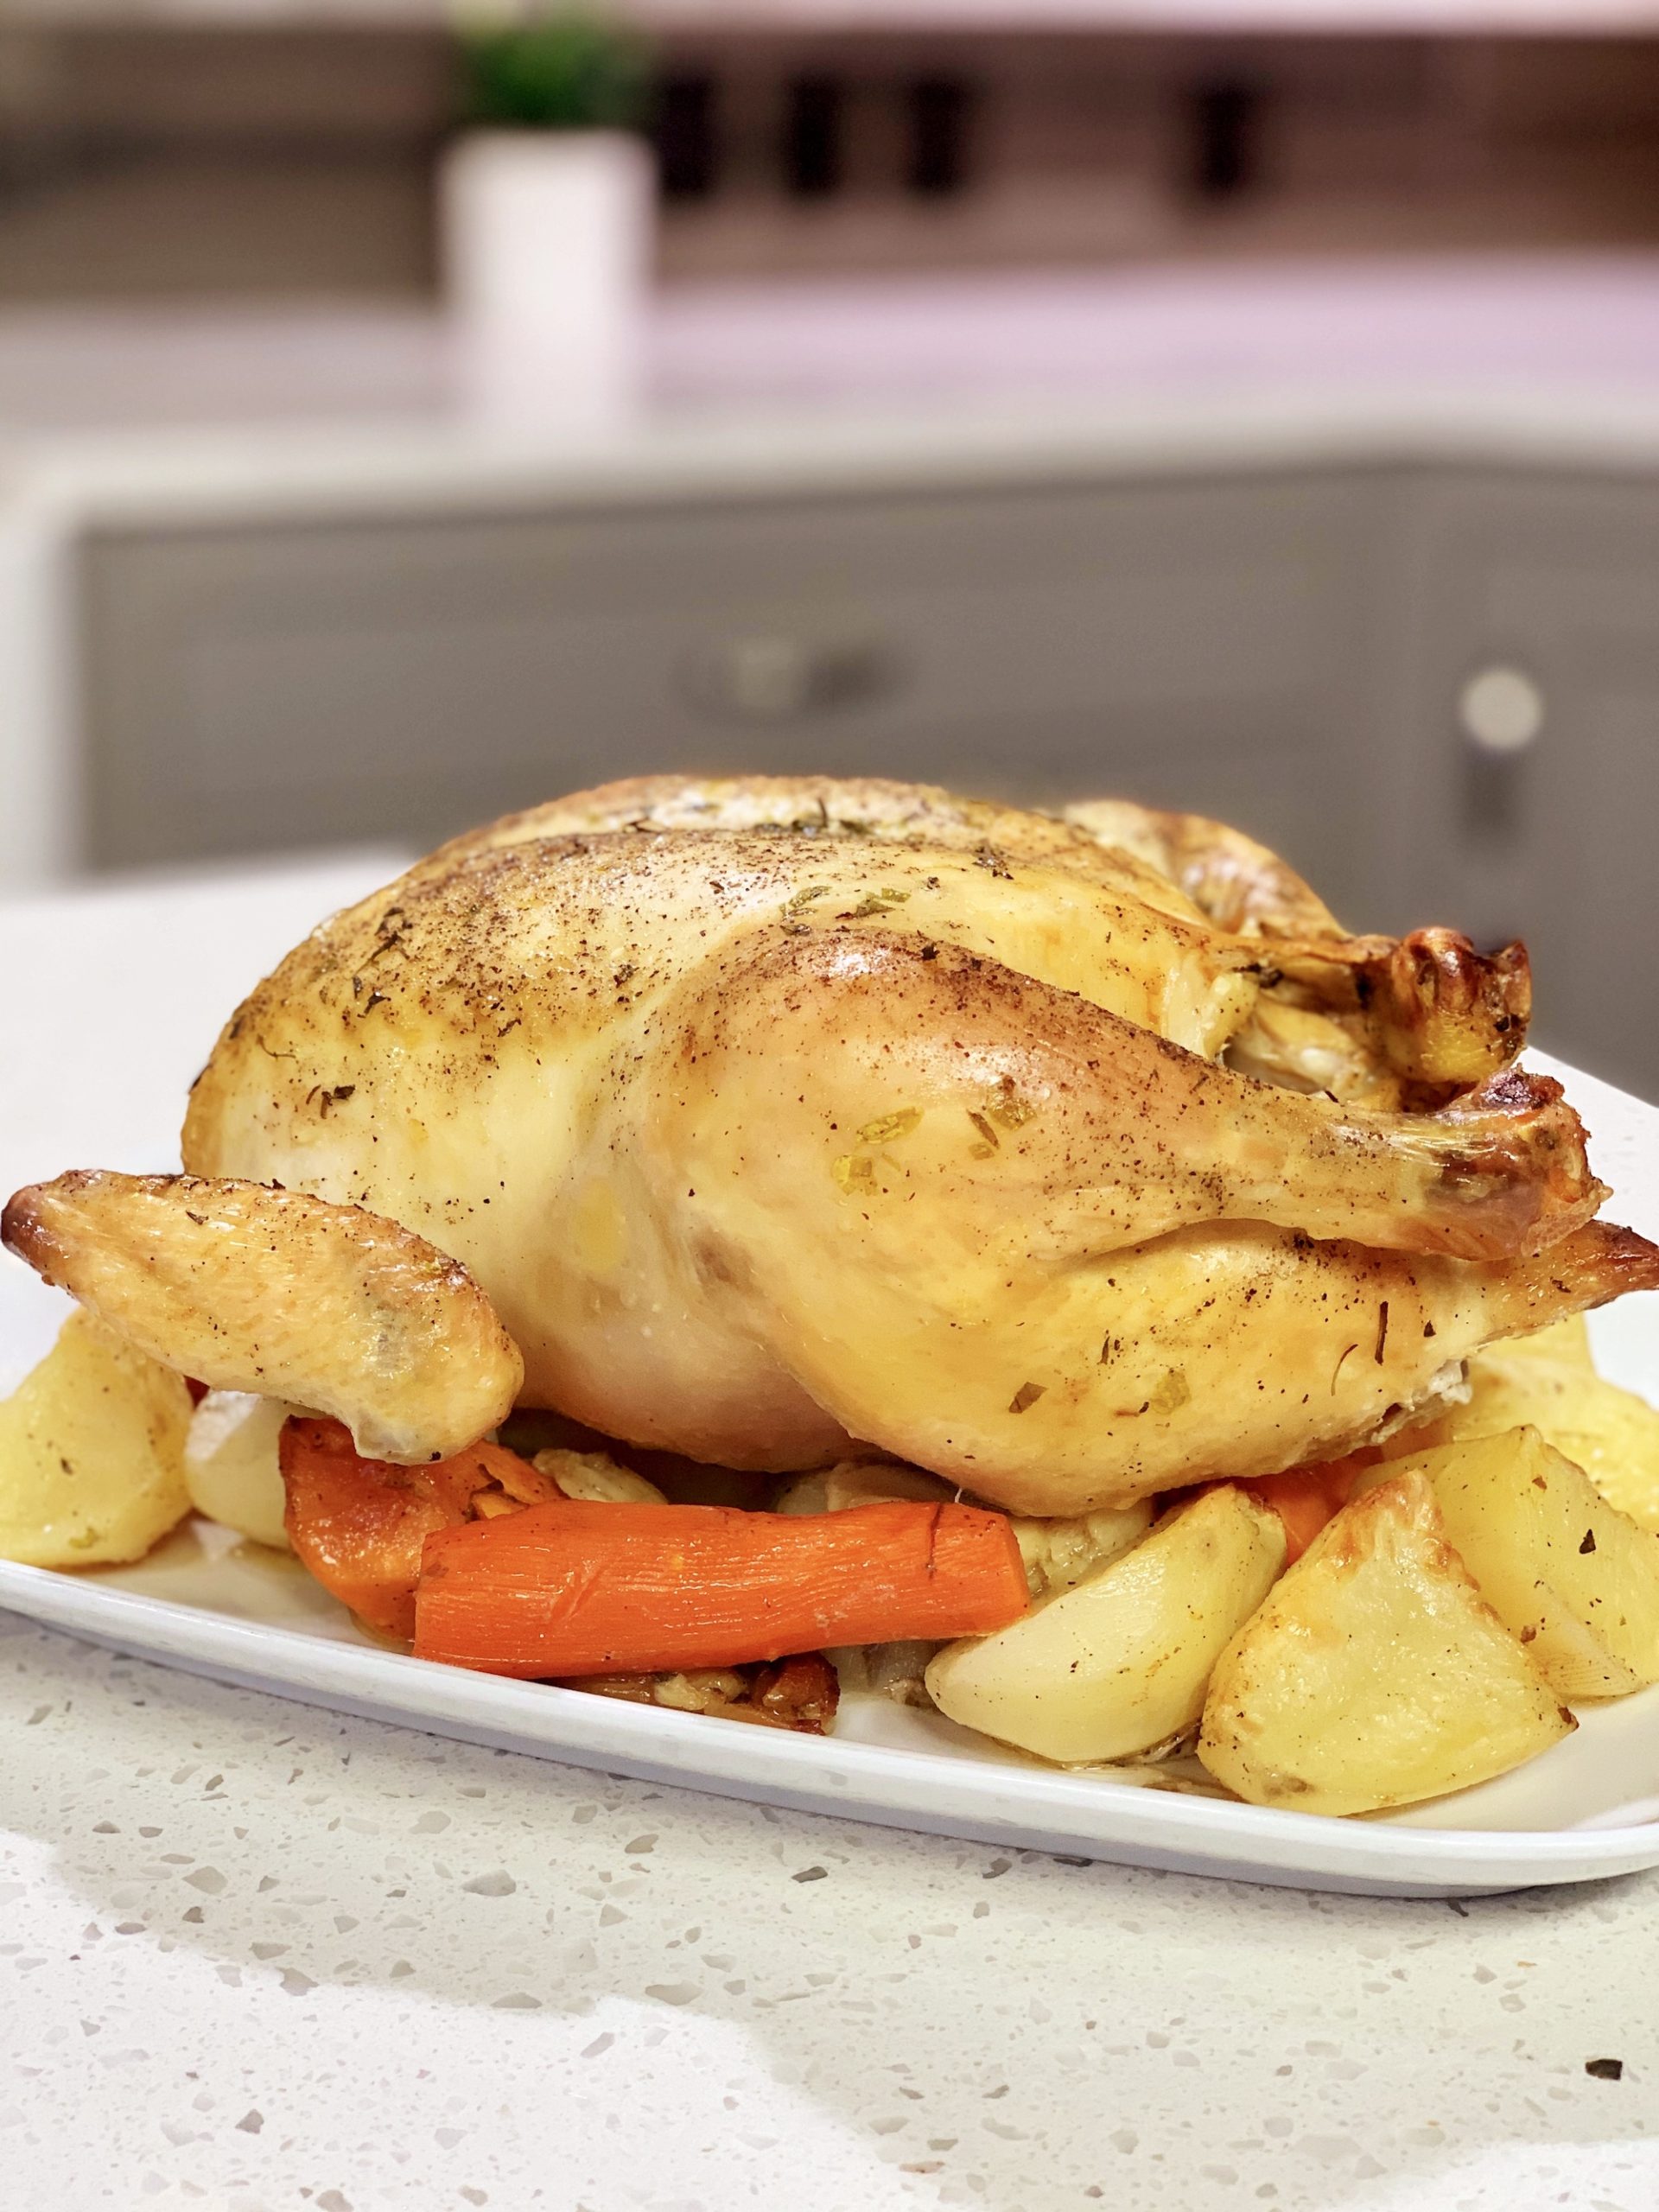 Roasted Chicken with Potatoes and Carrots - cooking with chef bryan